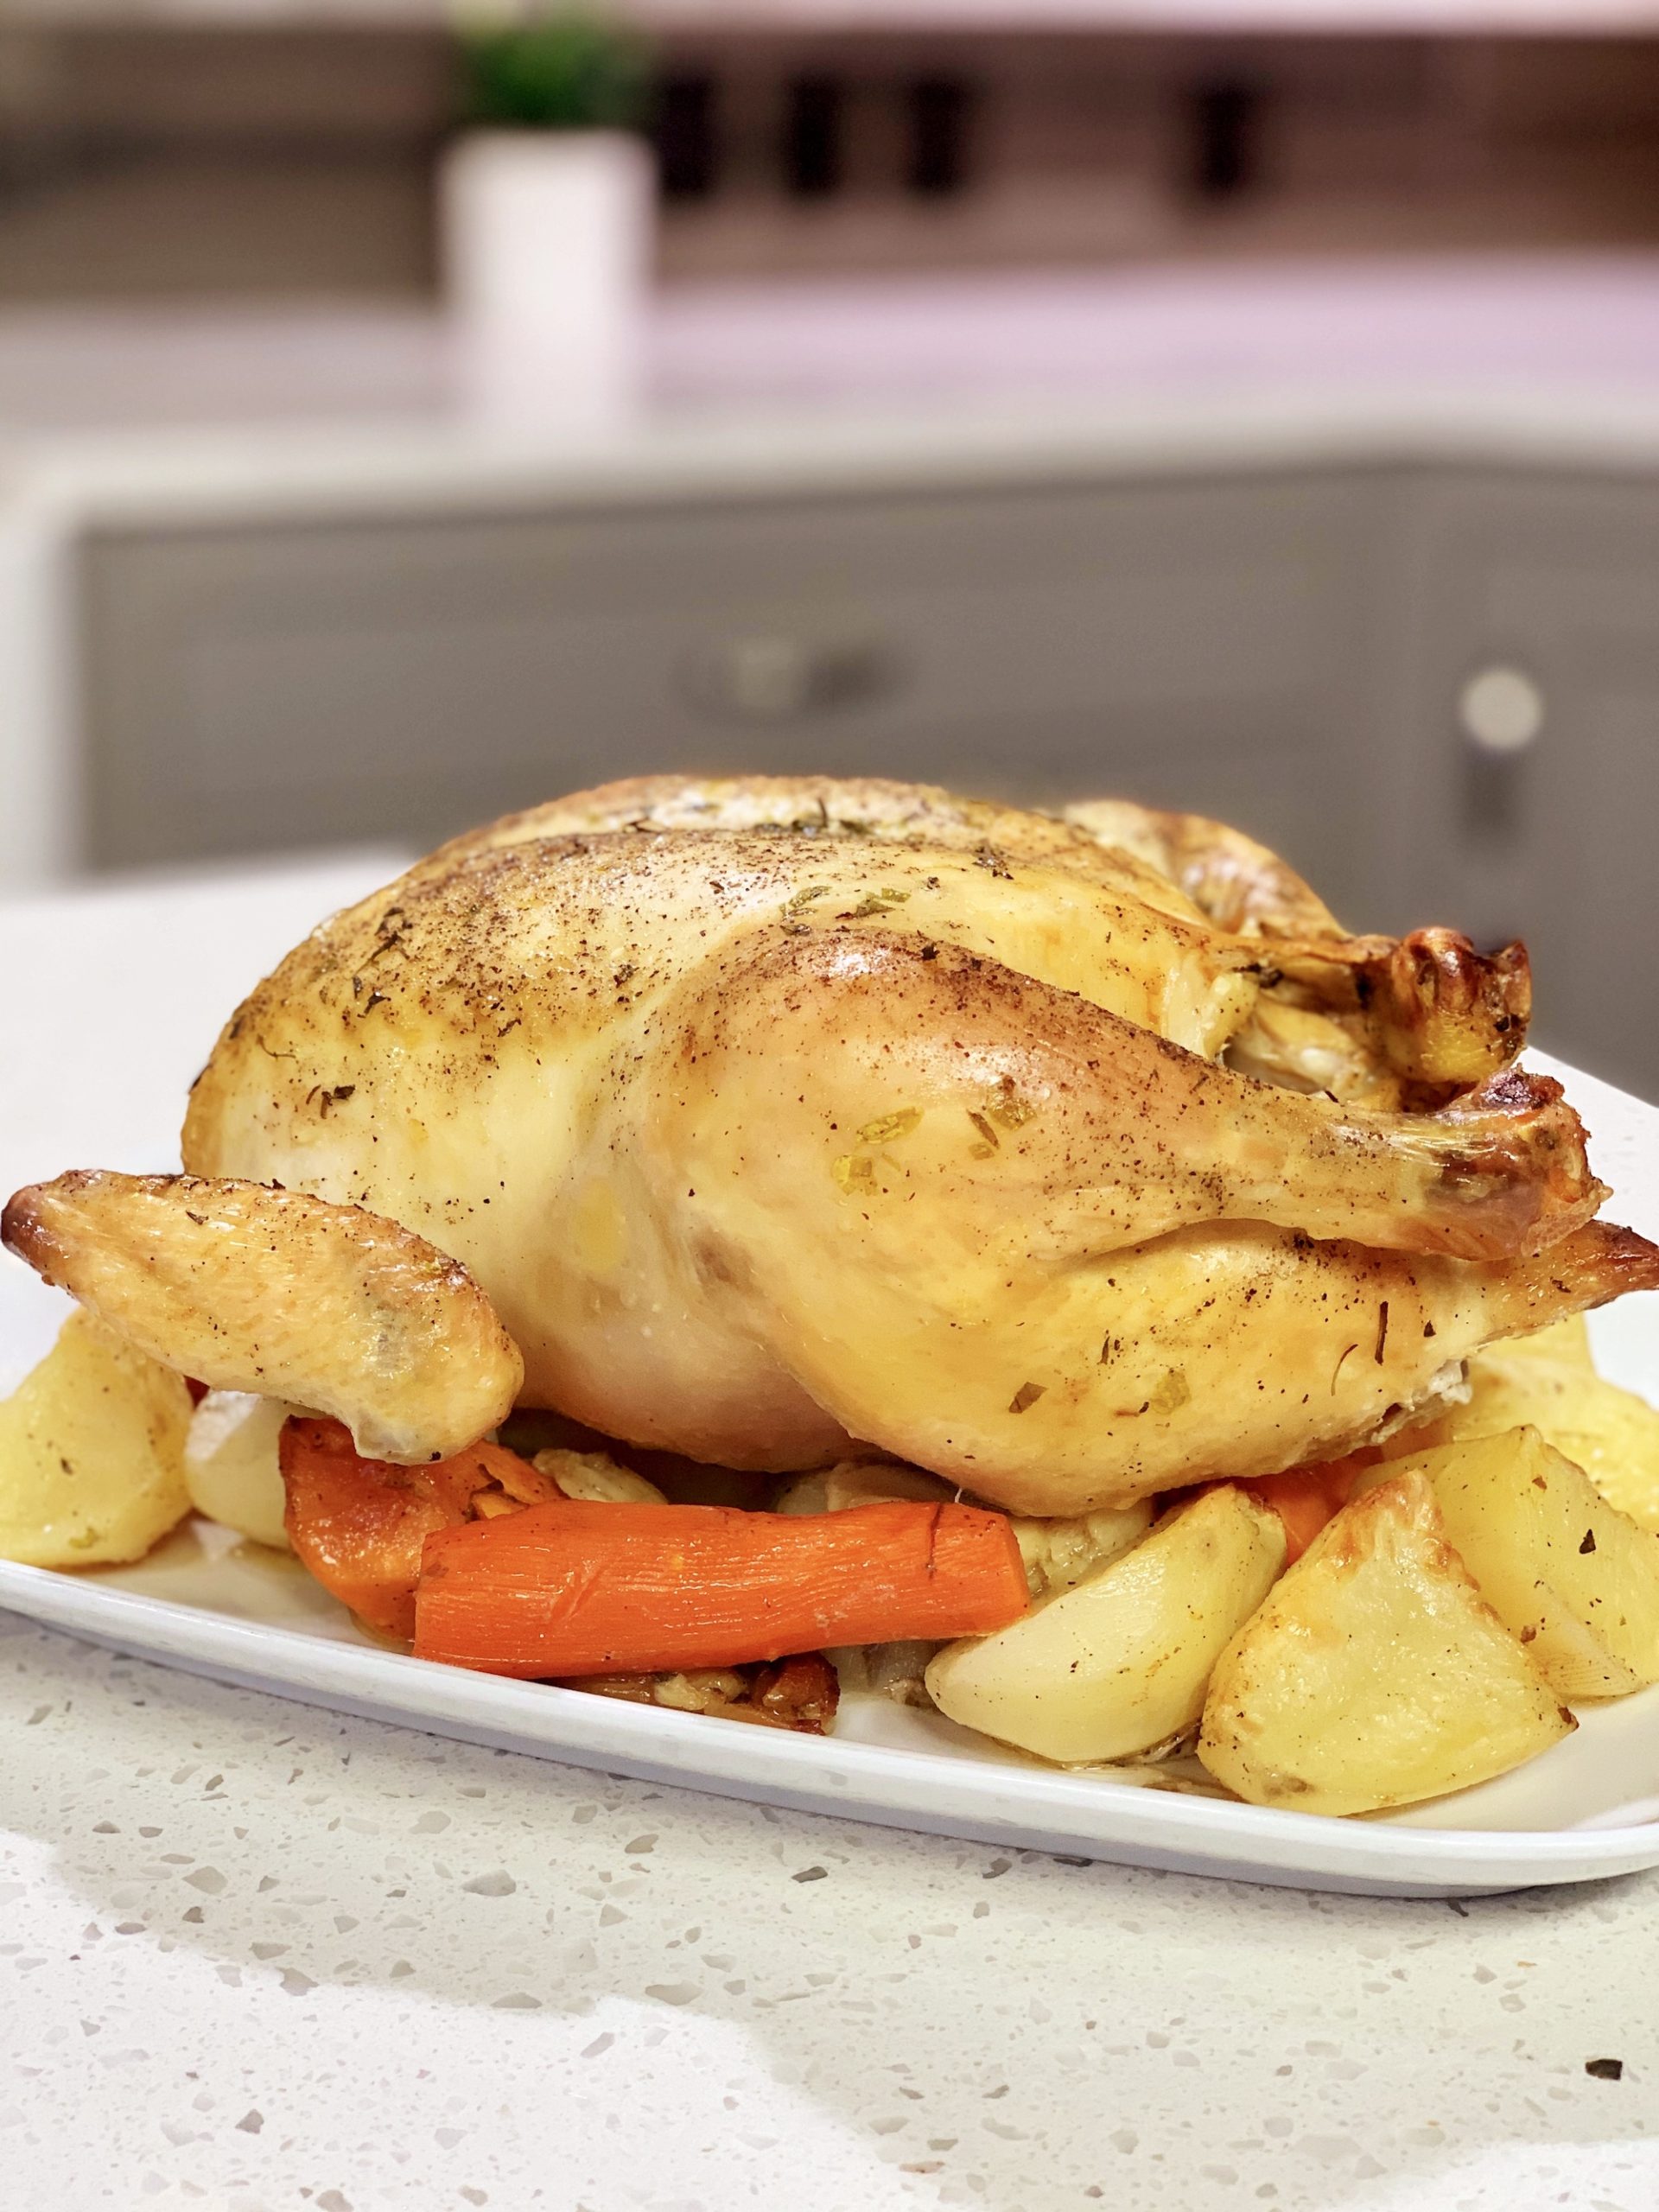 Roasted Chicken with Potatoes and Carrots - cooking with chef bryan